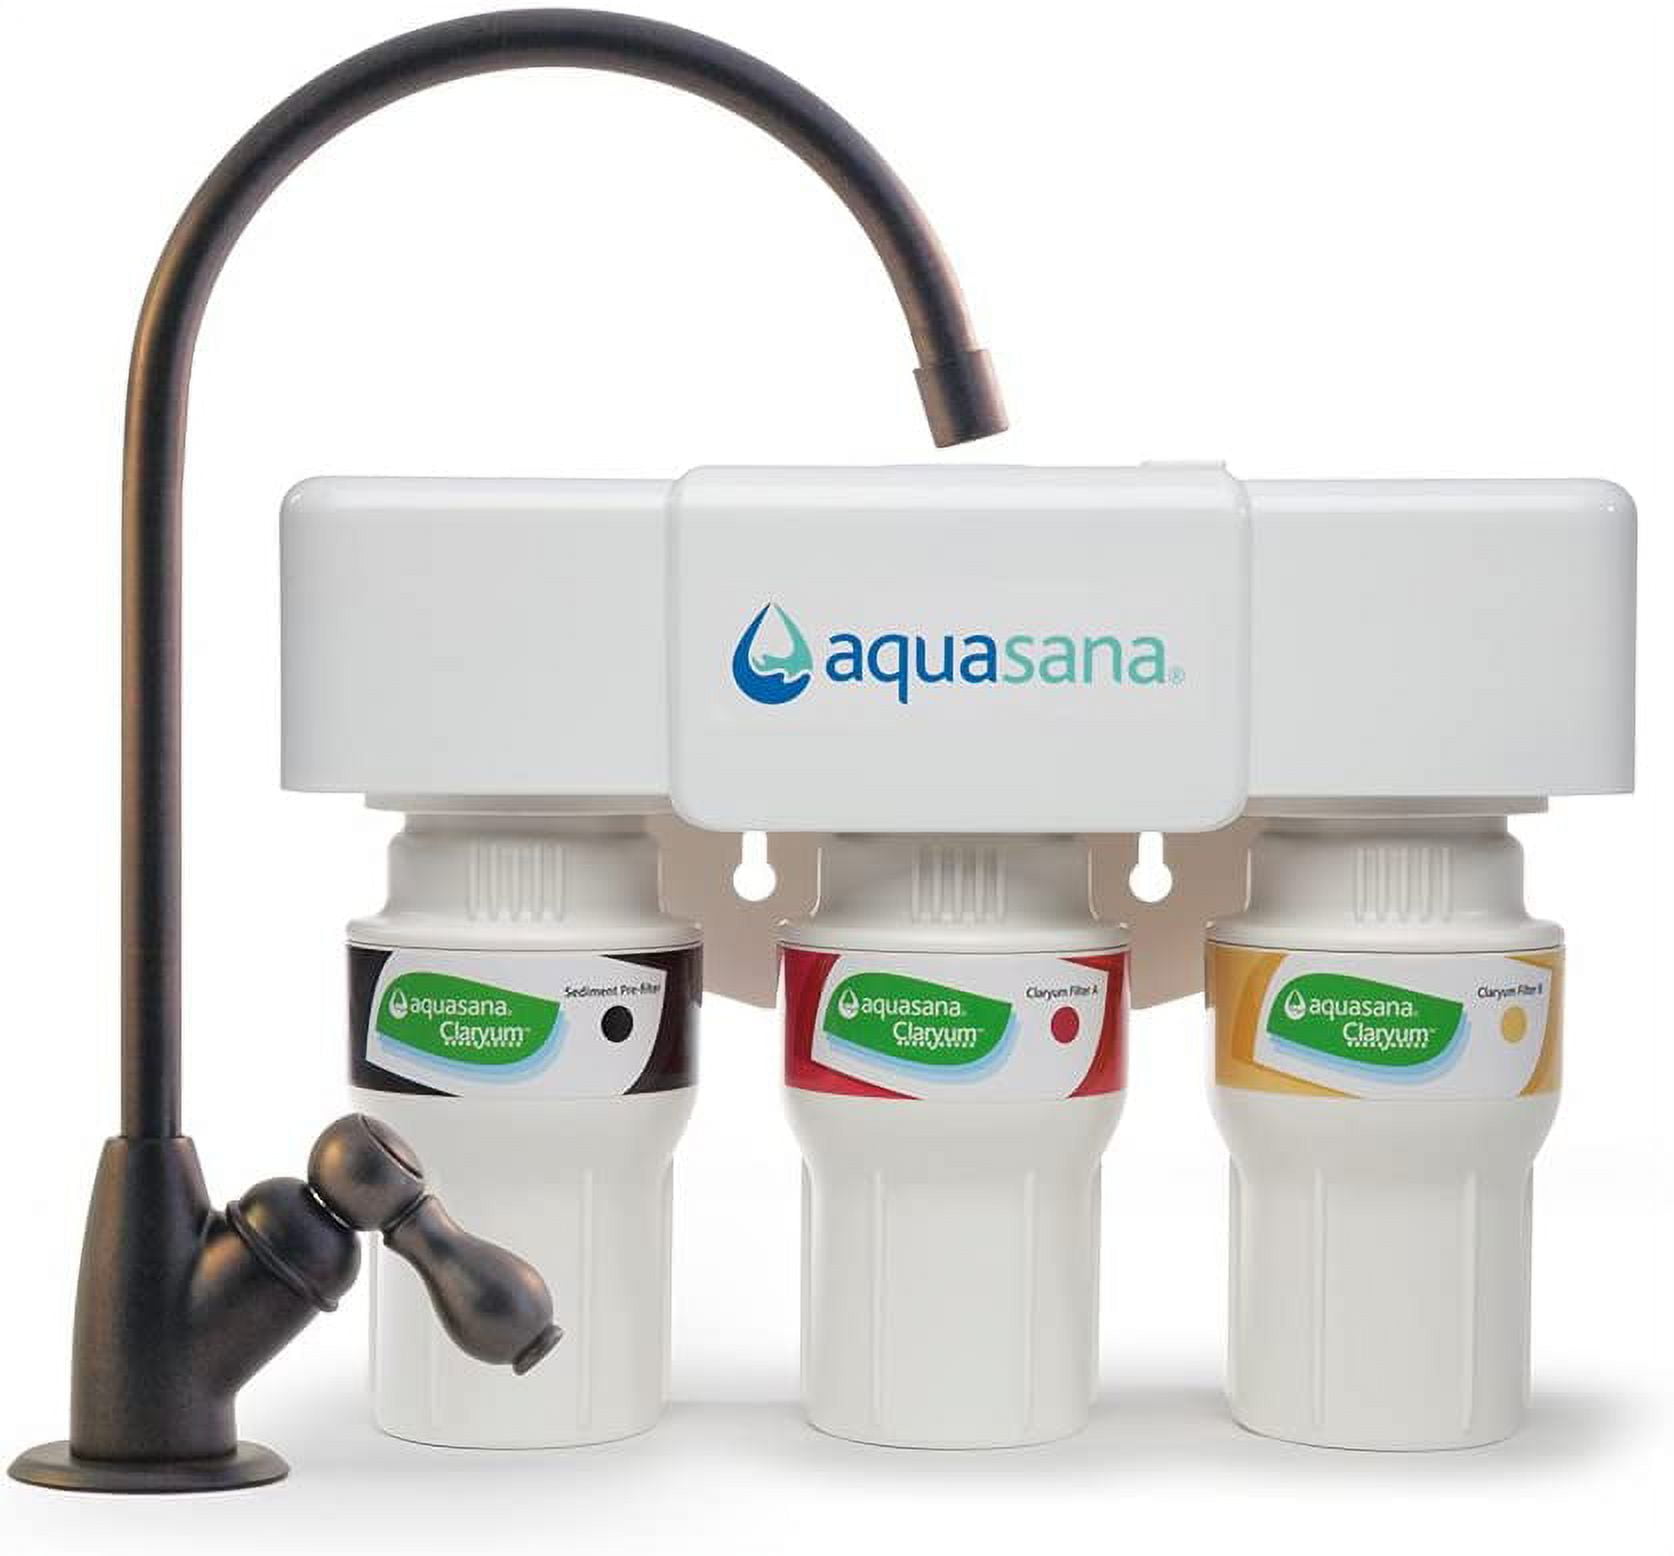 Aquasana 3-Stage Max Flow Claryum Under Sink Water Filter System Kitchen  Counter Faucet Filtration Filters 99% Of Chloramine – Oil-Rubbed Bronze  AQ-5300+